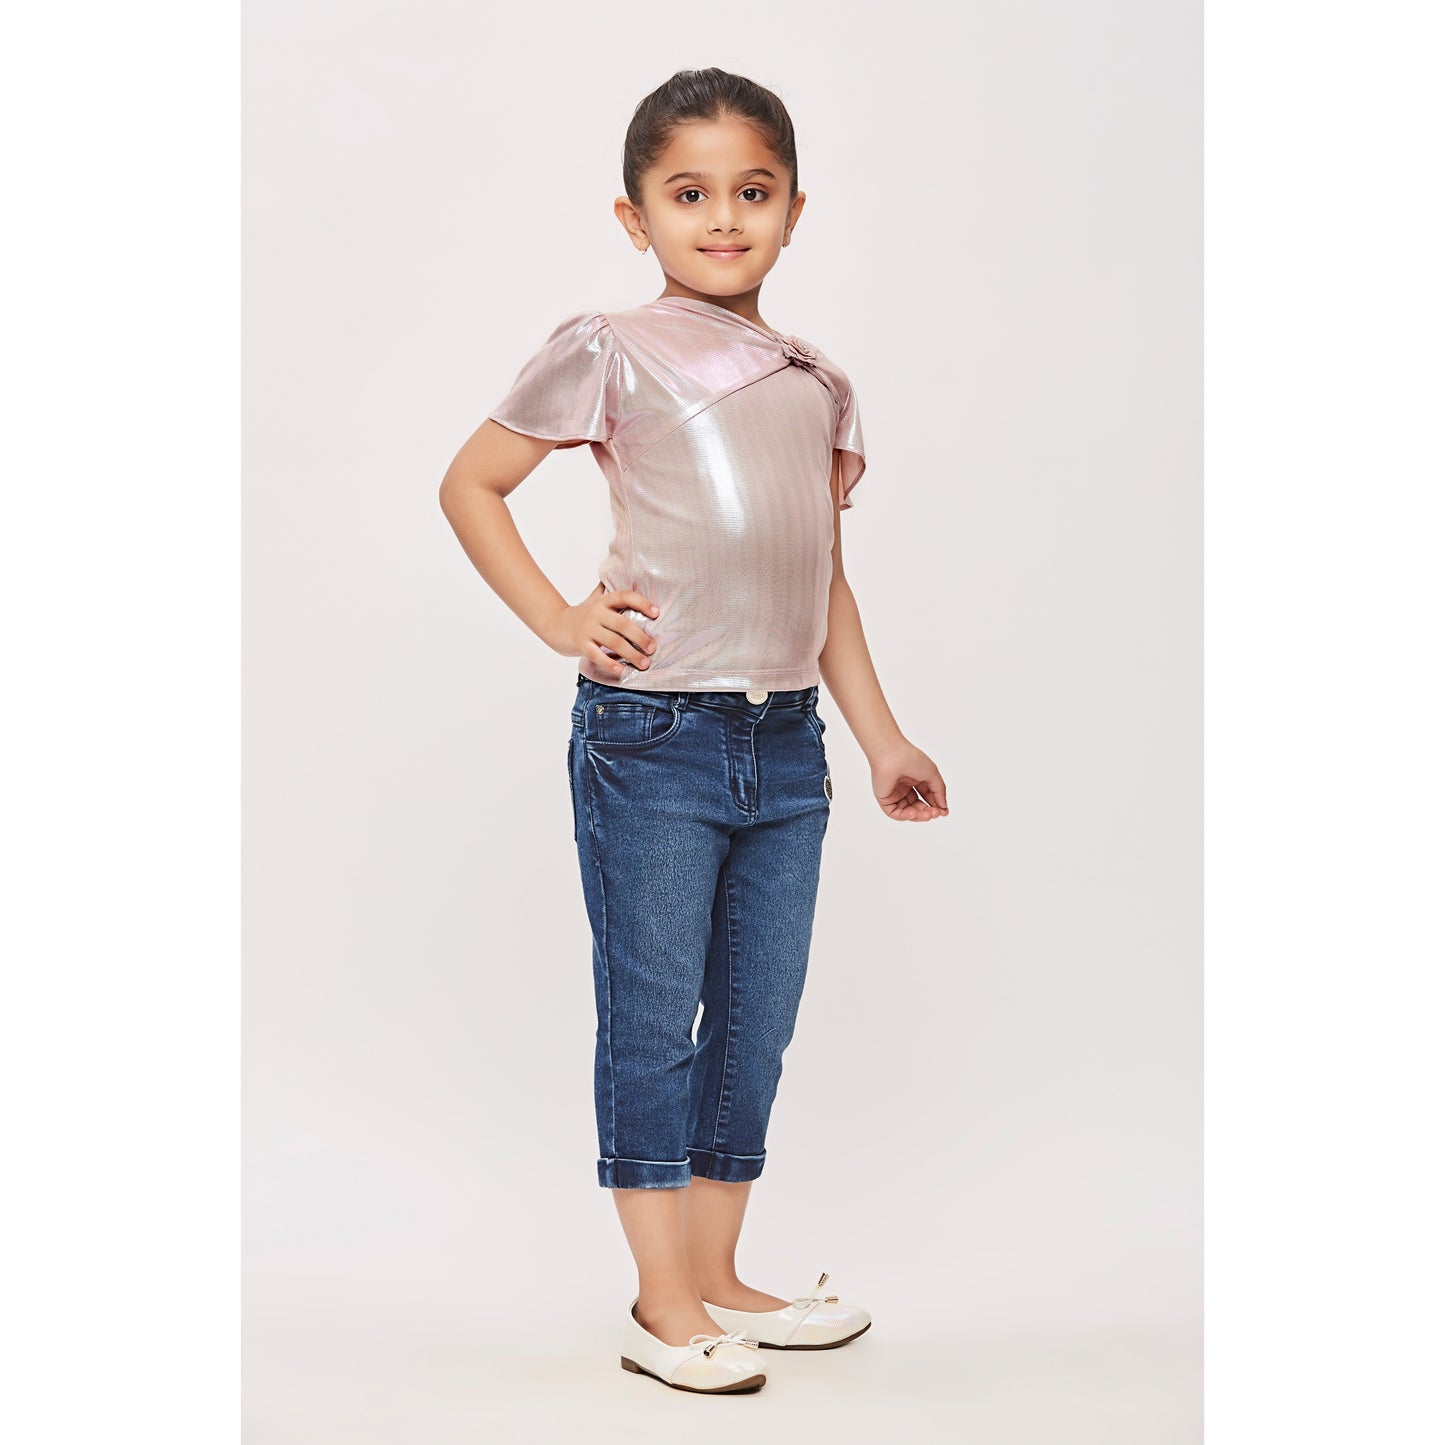 Pink Half Sleeves Multicoloured Finish With Stylish Neckline & Designed By Braoch.